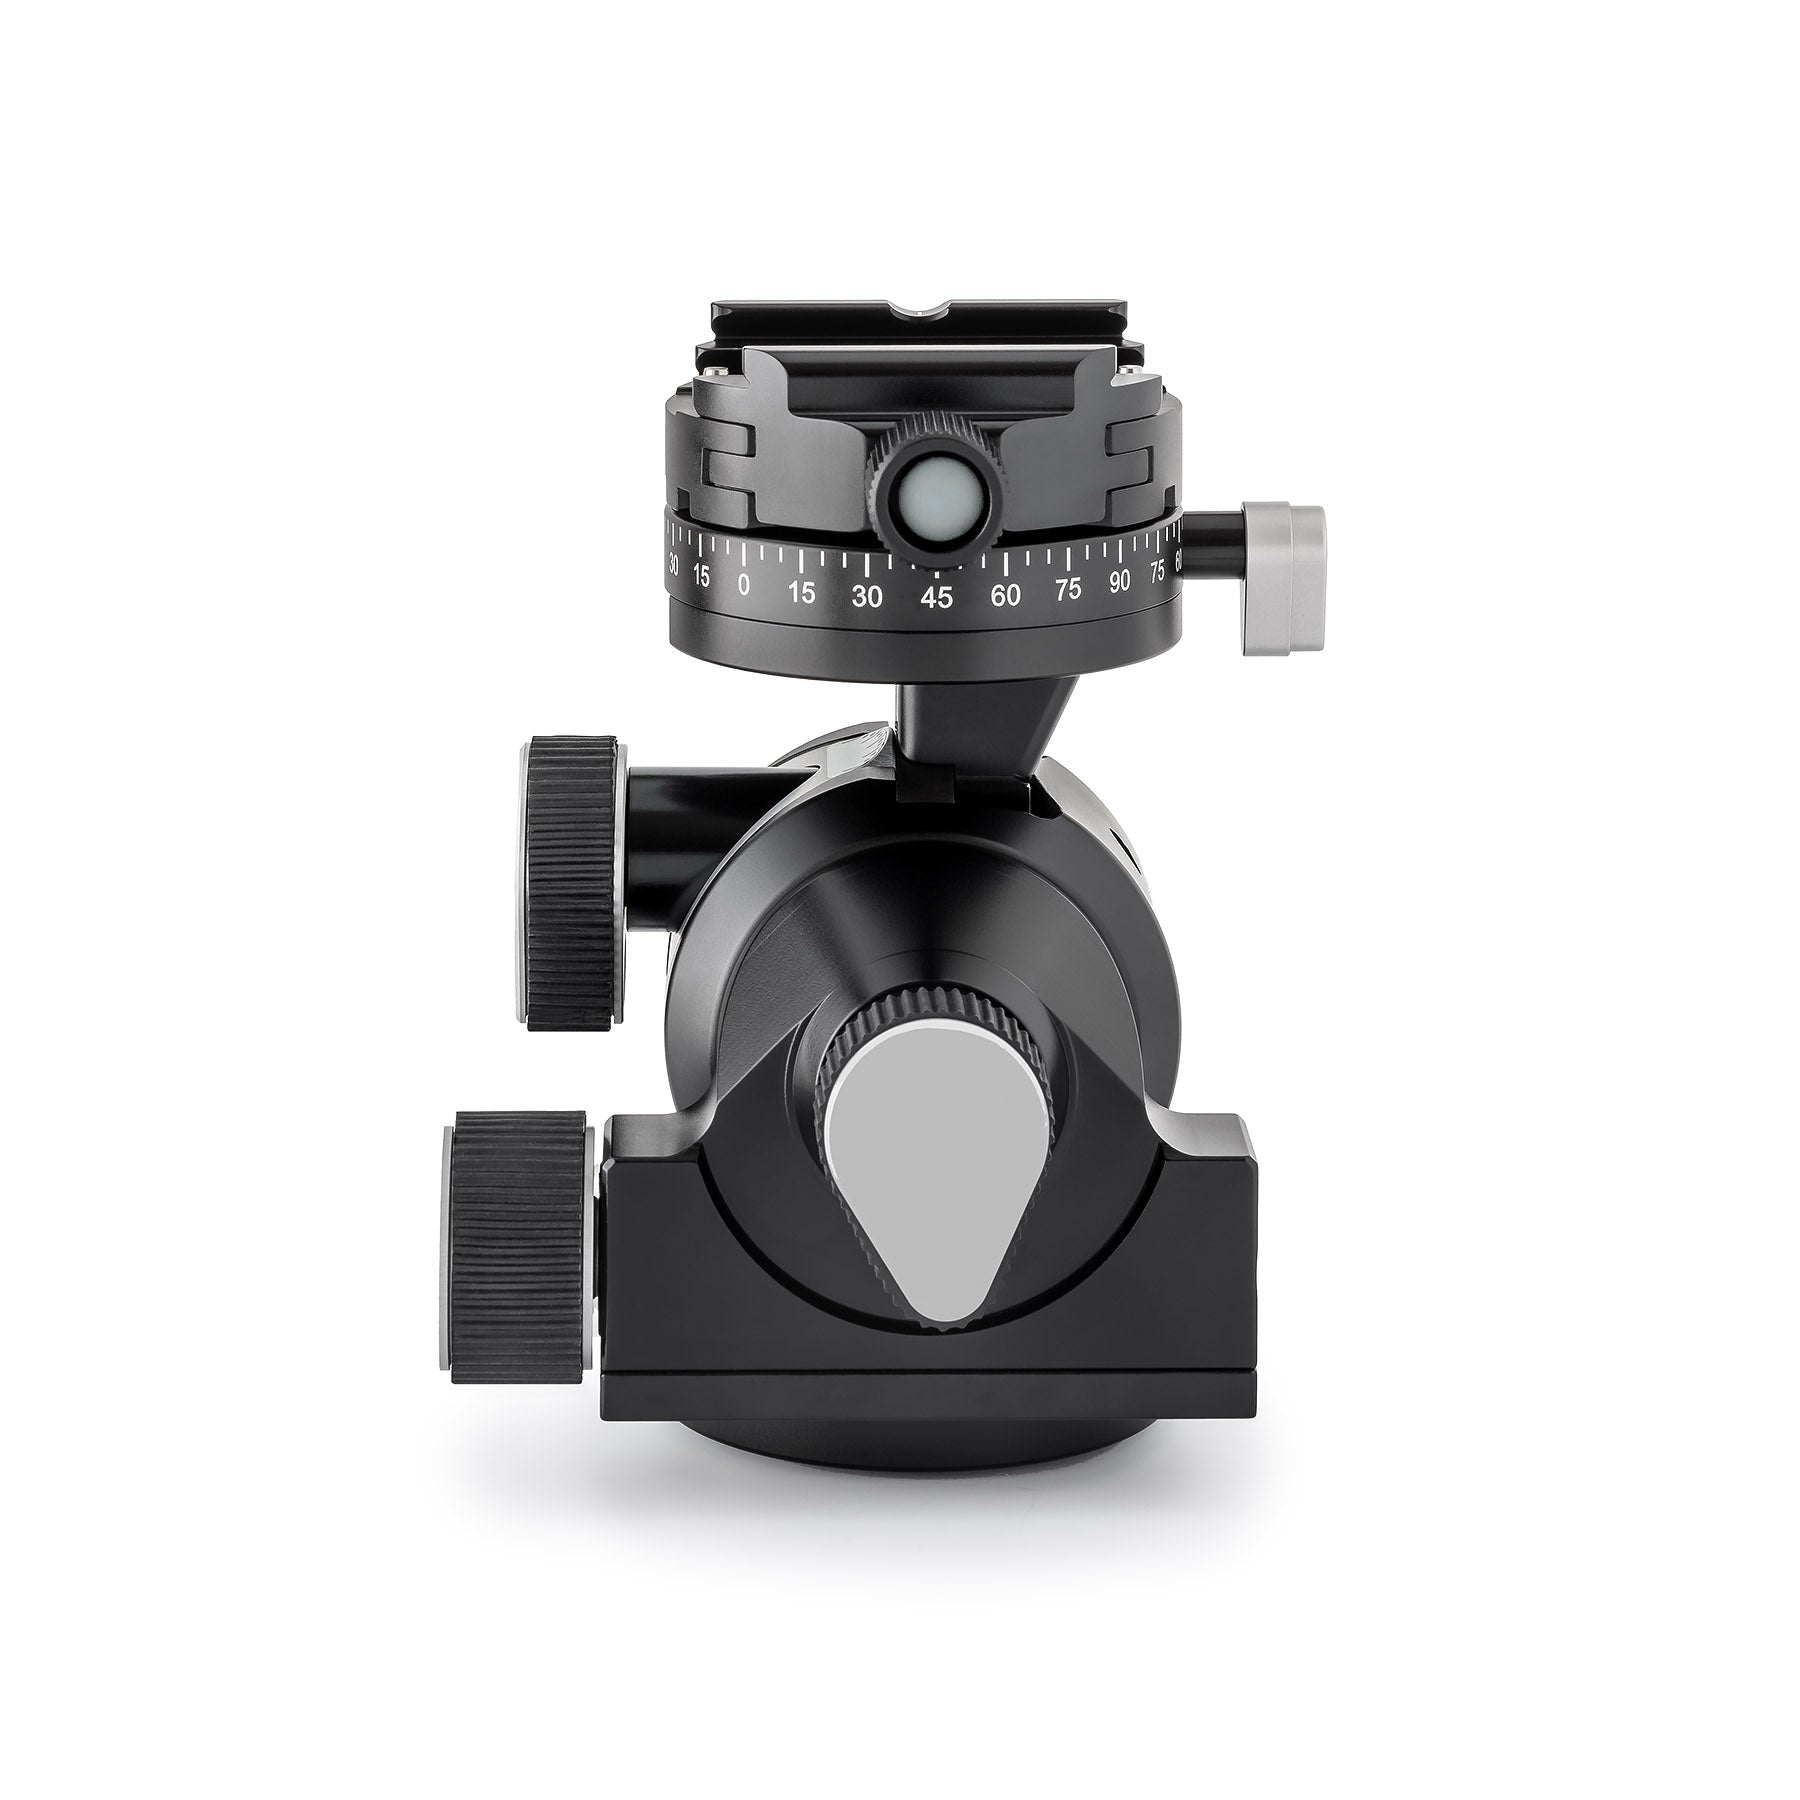 Arca-Swiss D4 geared tripod head with Classic quick release, side view photograph, model 870103